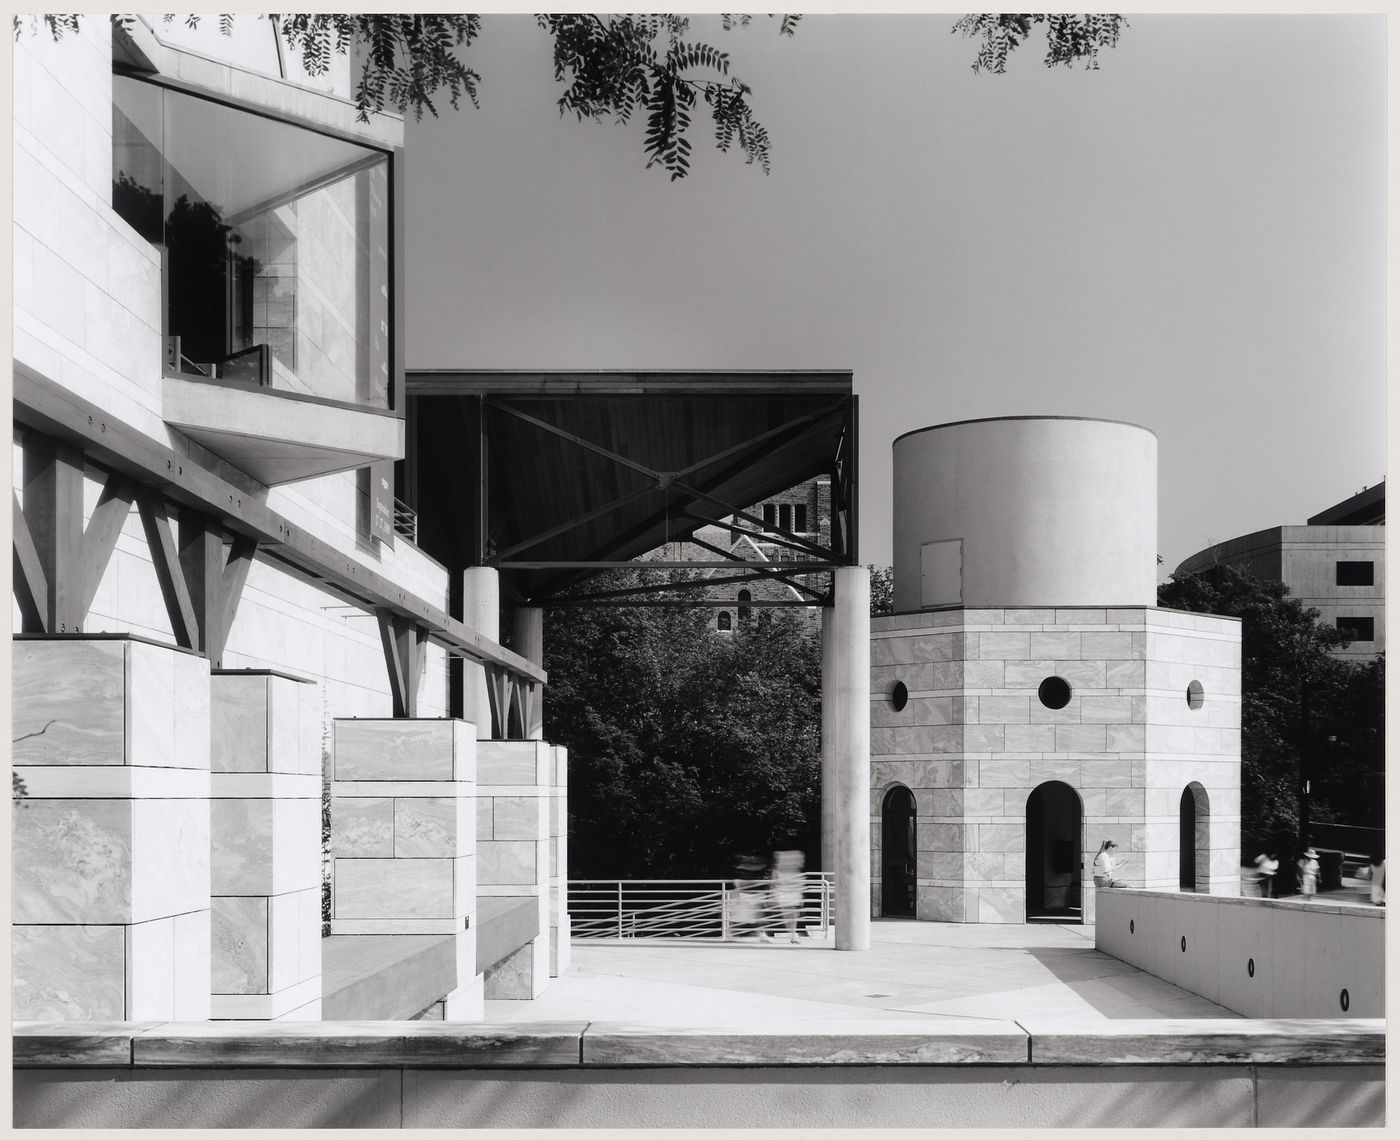 Center for Theatre Arts, Cornell University, Ithaca, New York: view of forecourt and loggia